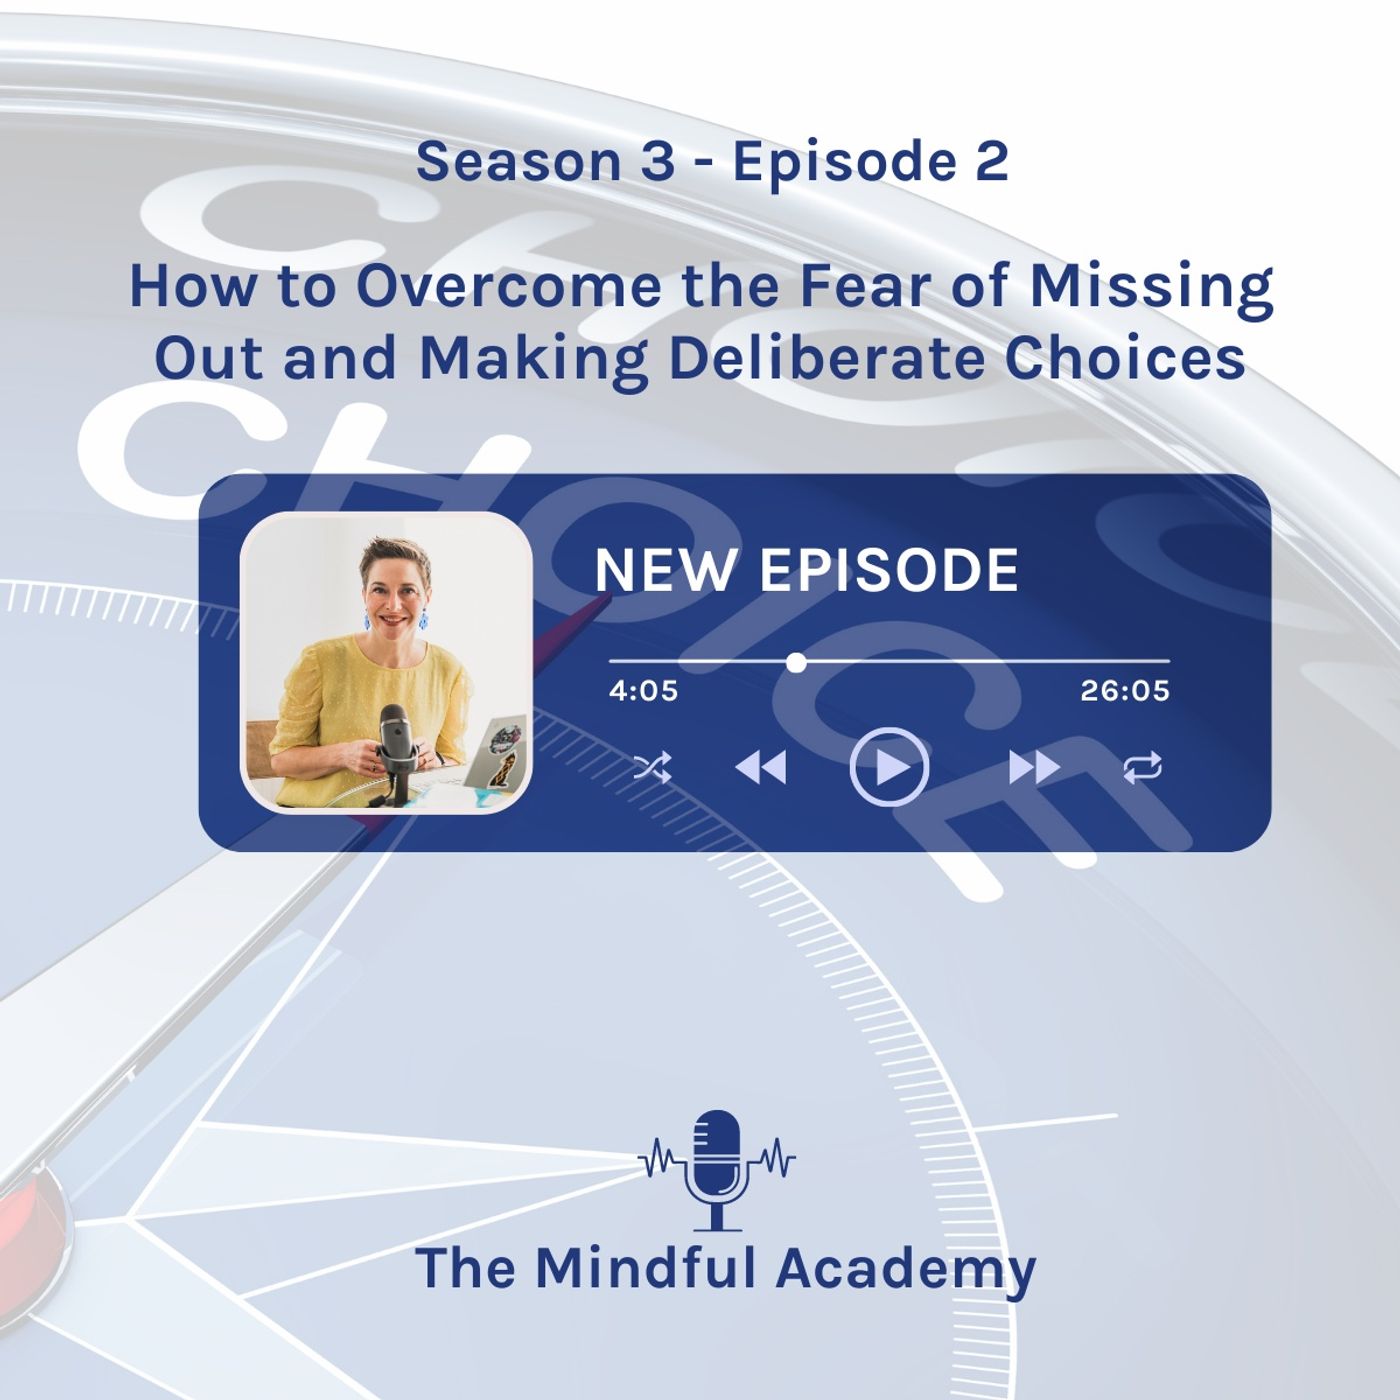 3.2: How to Overcome the Fear of Missing Out and Making Deliberate Choices